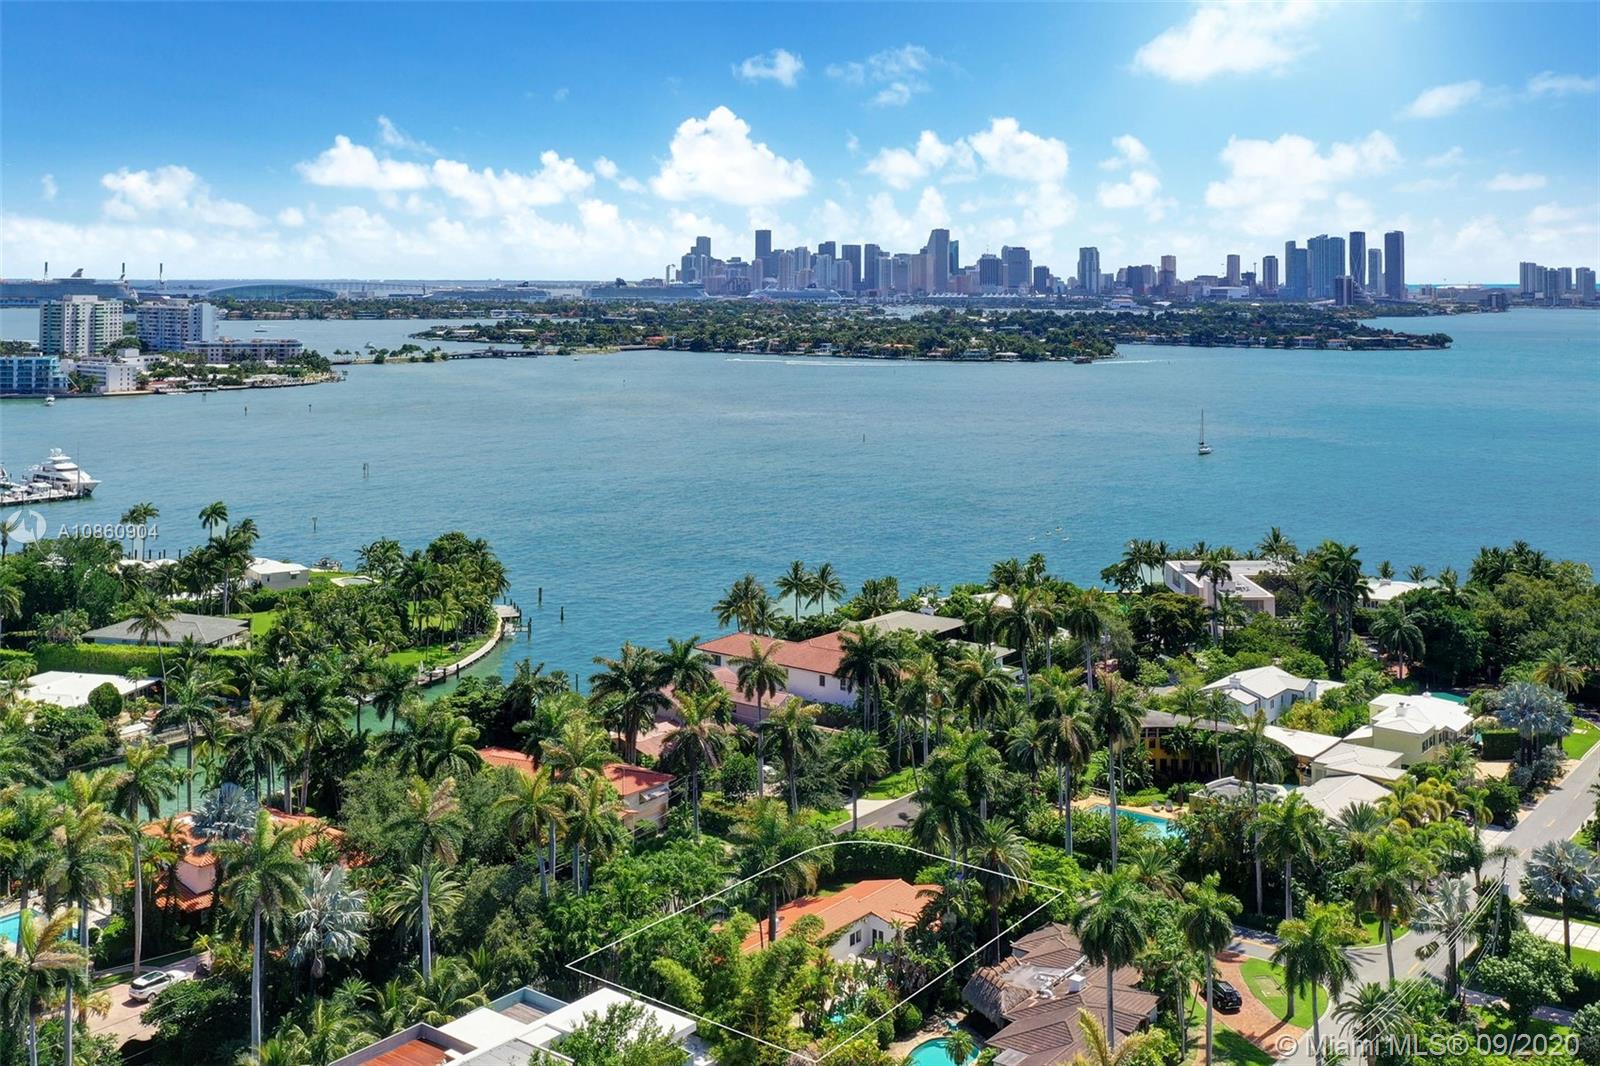 Southwest-facing aerial of Sunset Island home overlooking Venetian Islands and Downtown Miami